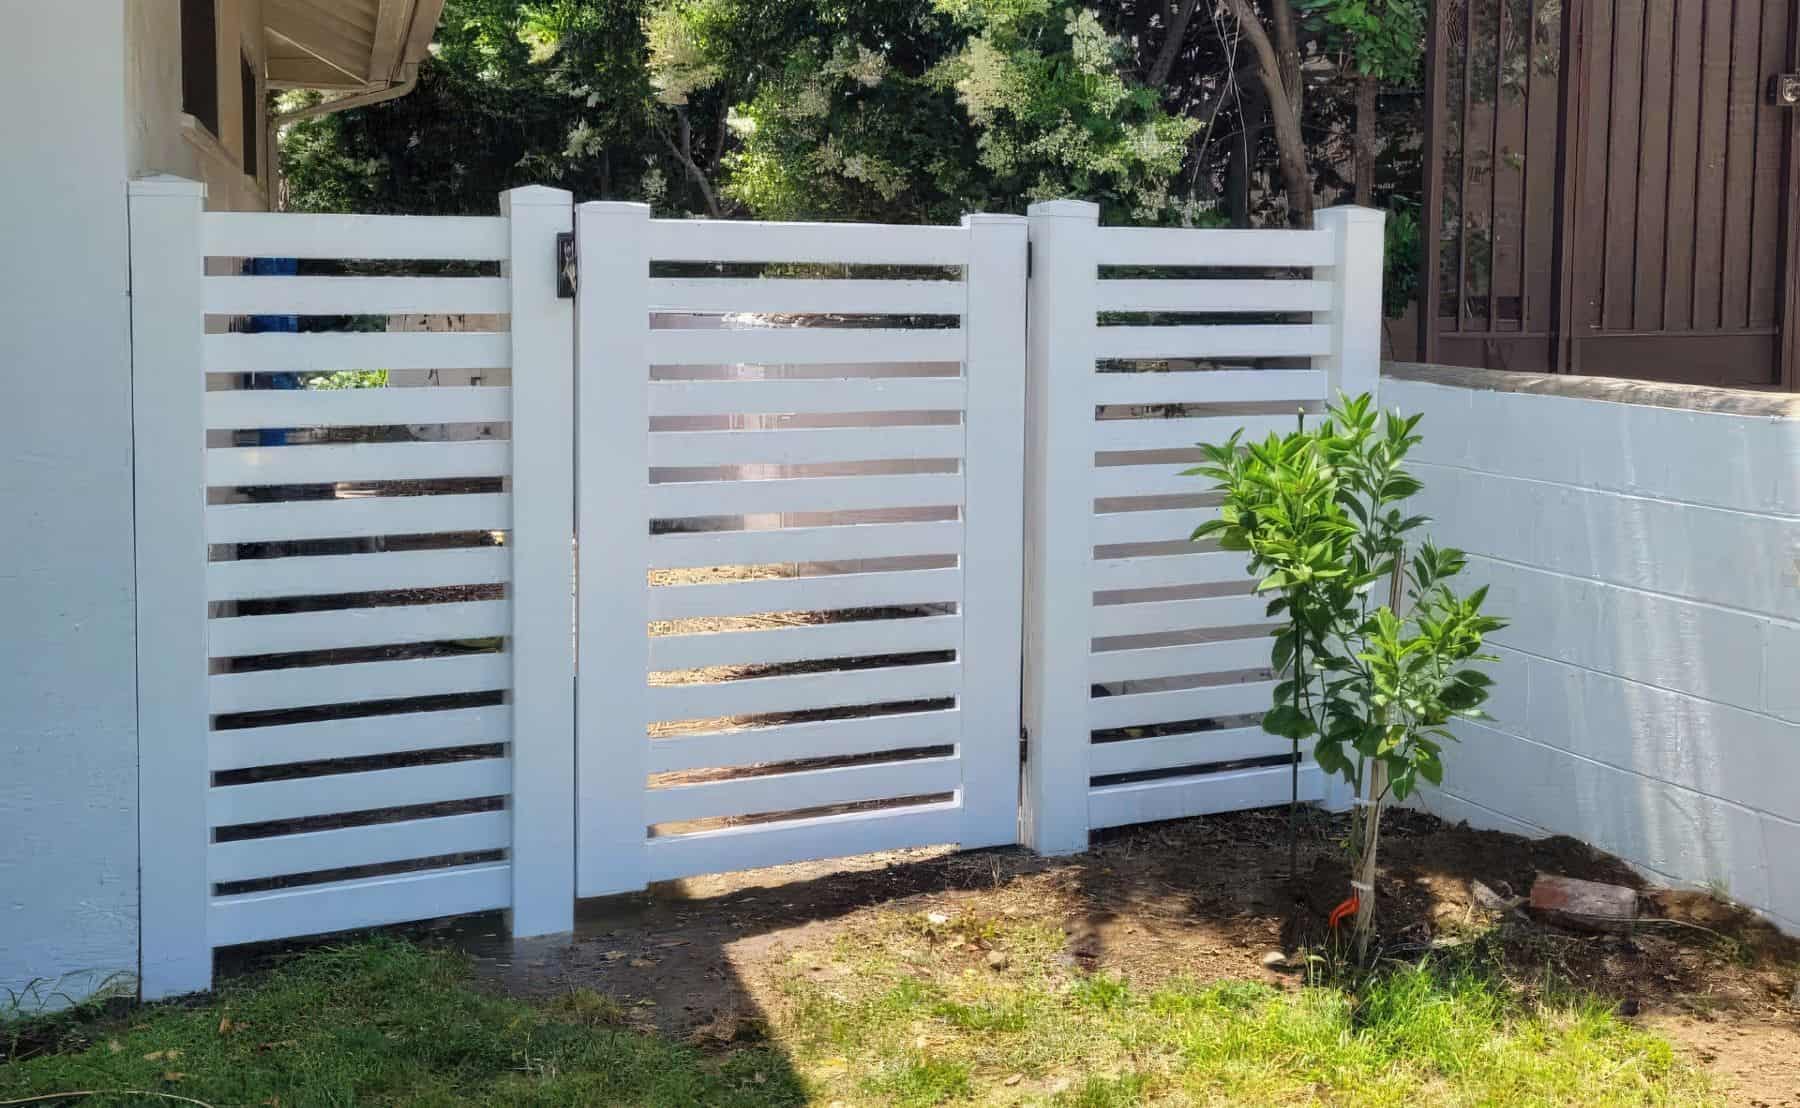 White slatted, vinyl single side gate leading into grassy backyard garden from the side passage, surrounded by trees.